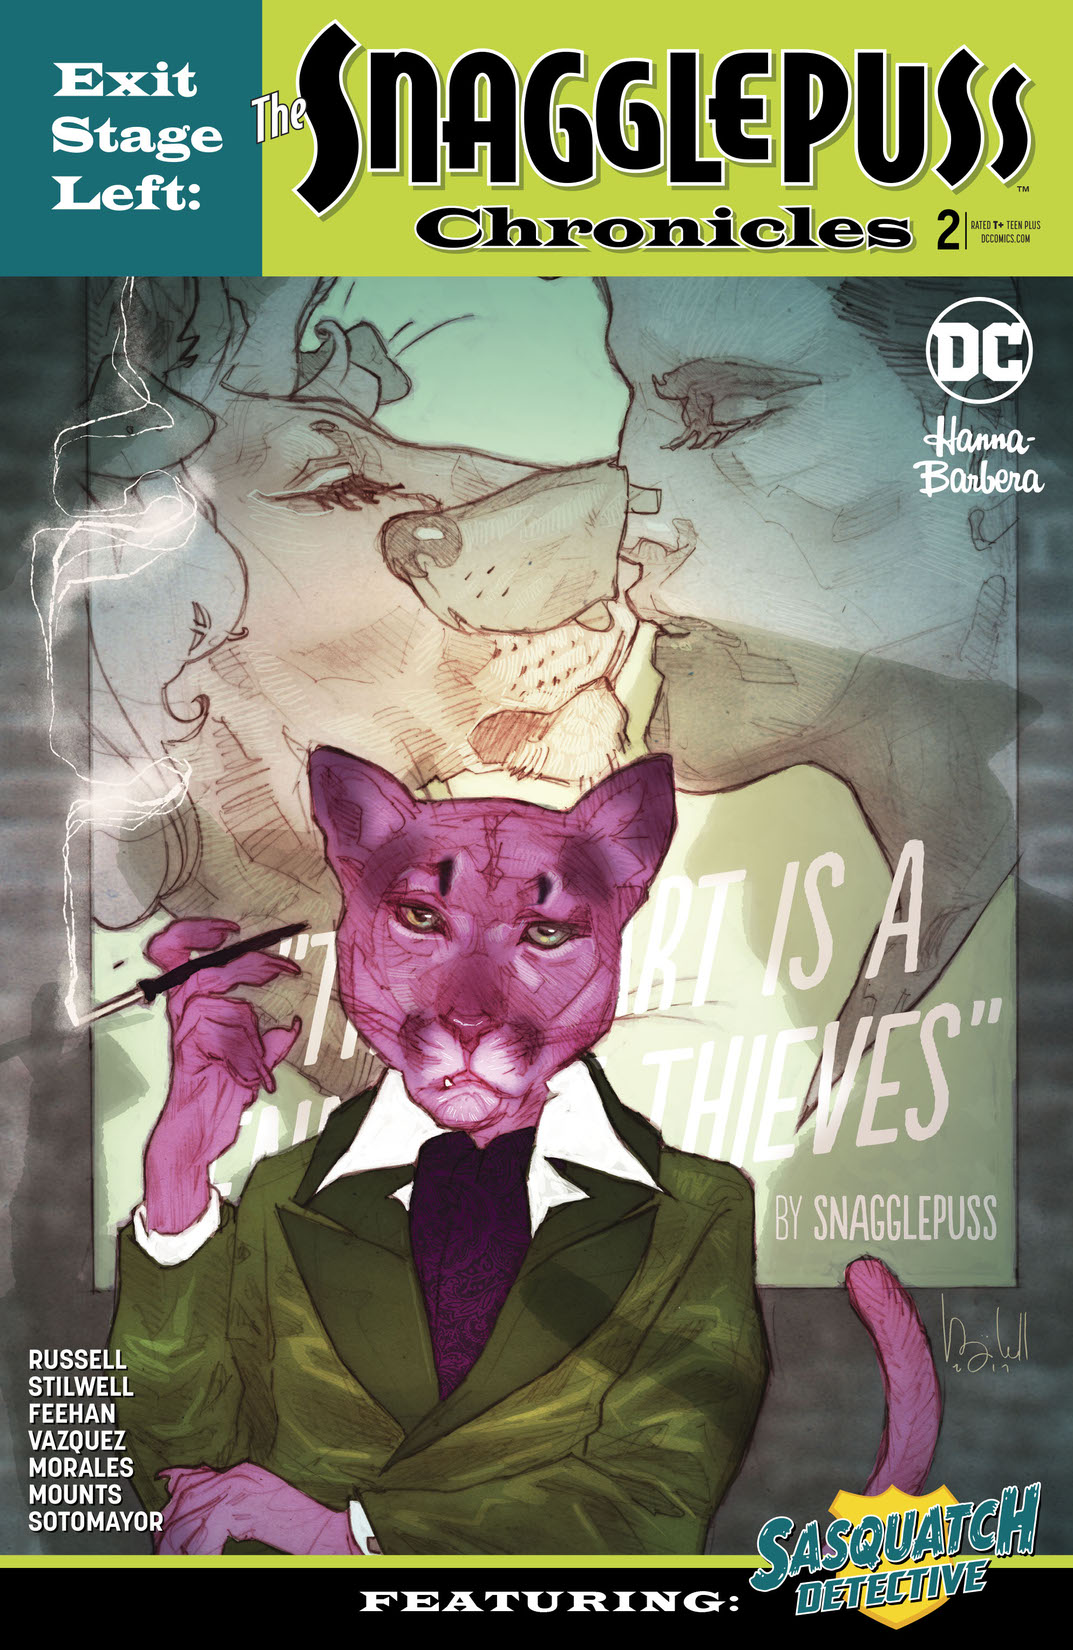 Exit Stage Left: The Snagglepuss Chronicles #2 preview images